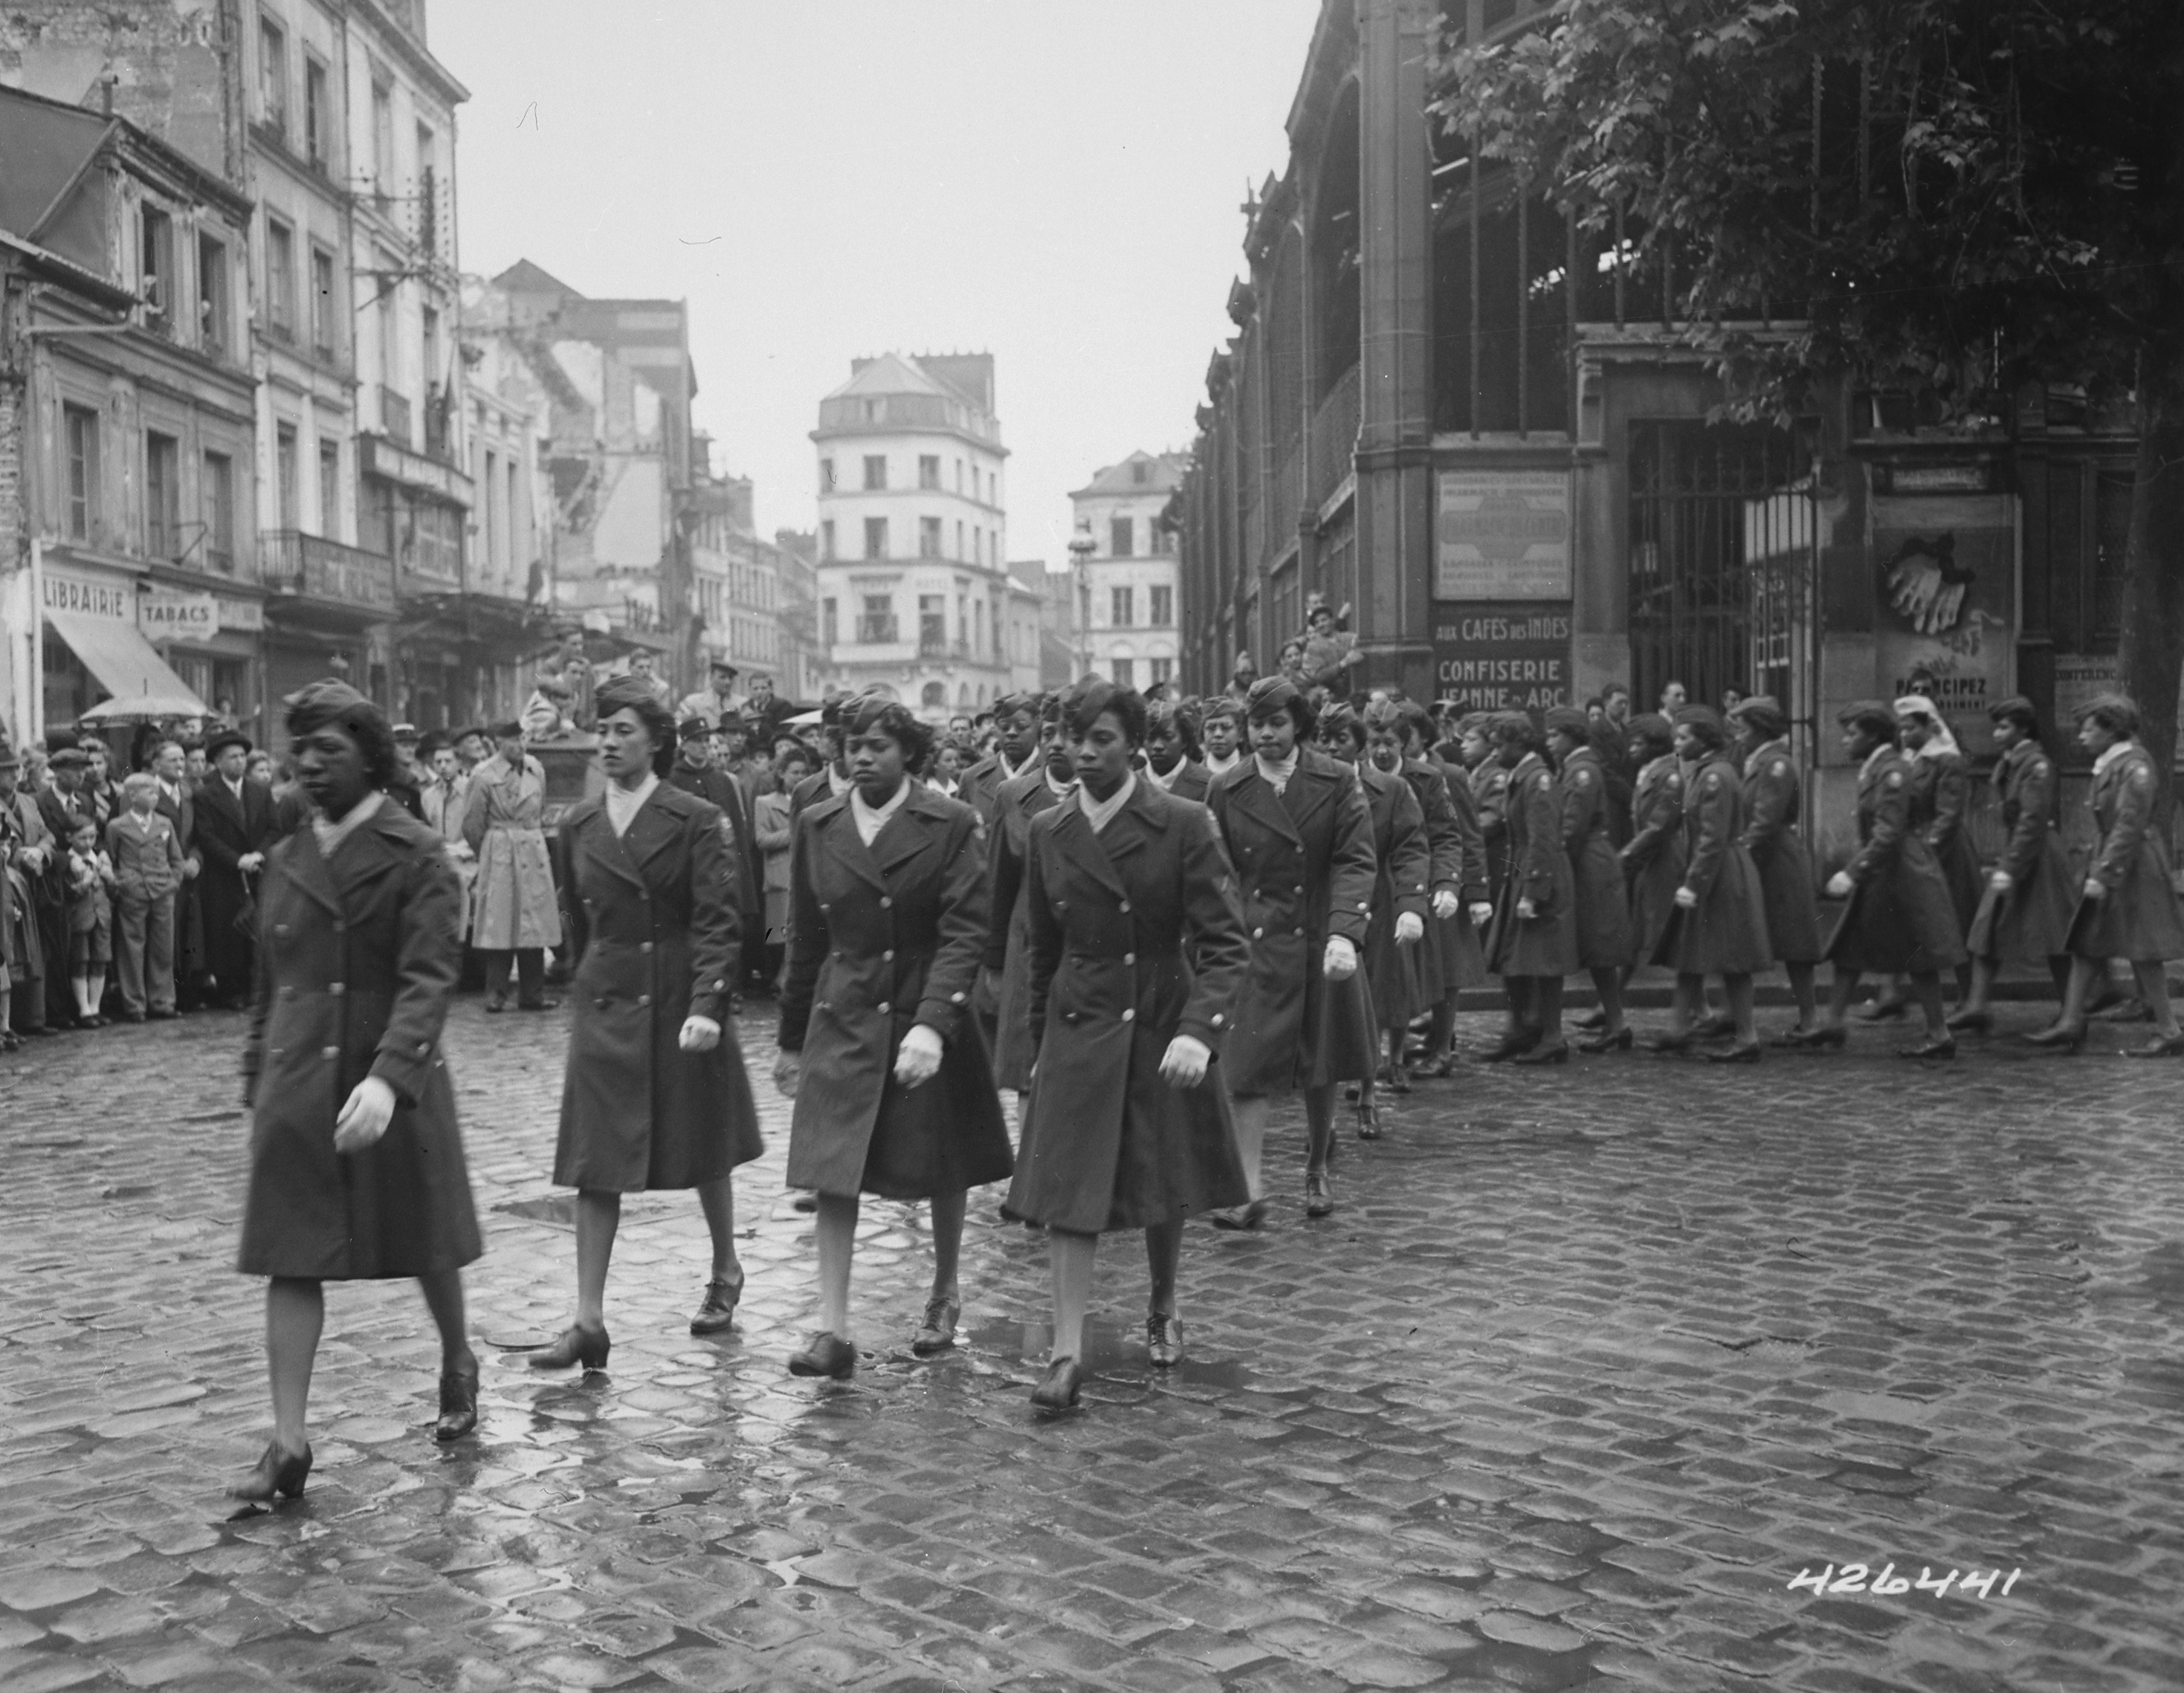 Postal Directory Battalion Marching in Parade